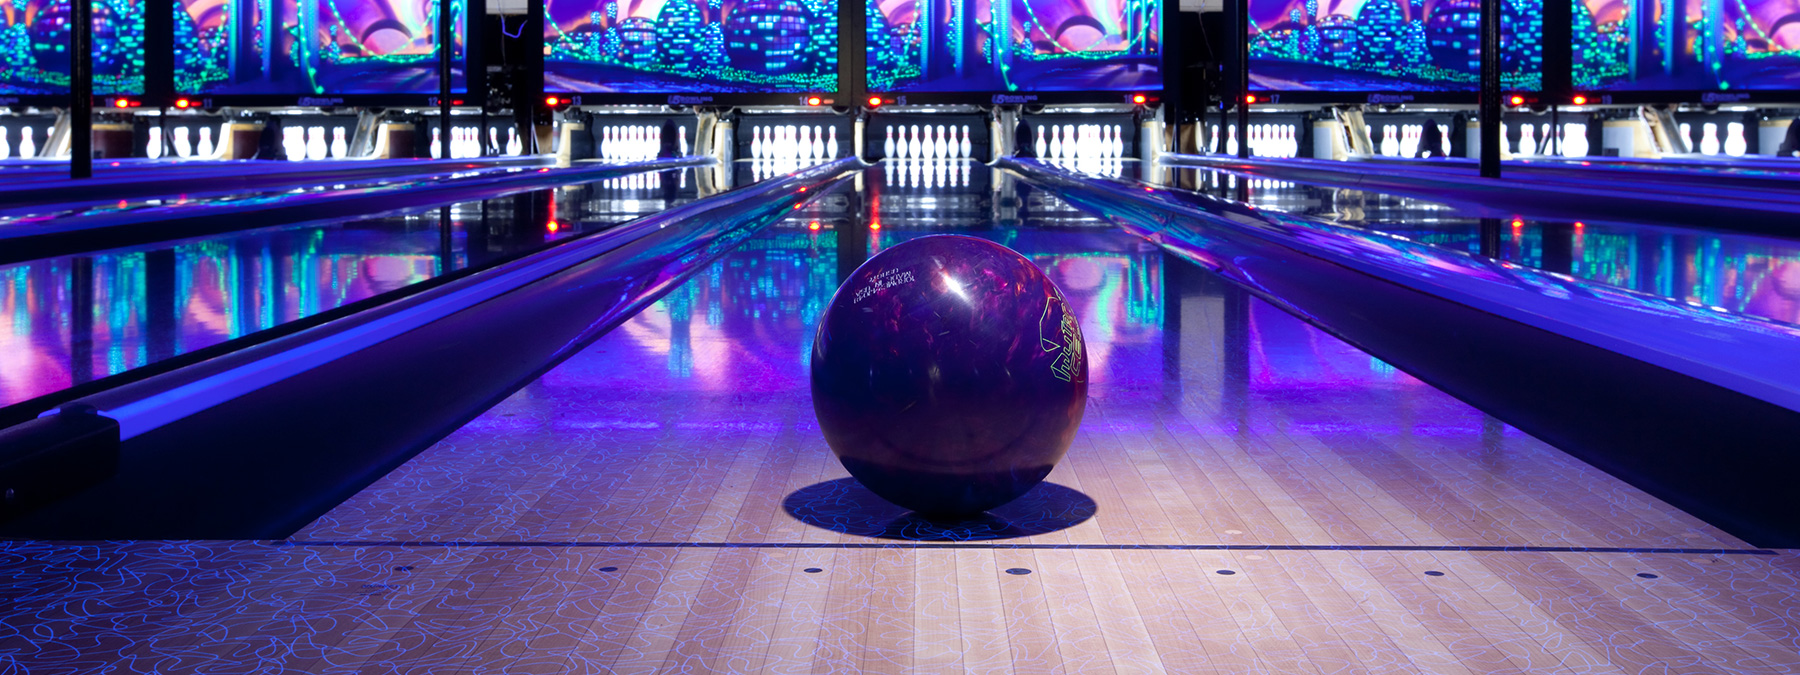 Strike Up Some Fun: Join a Bowling League and Beat the Winter Blues!